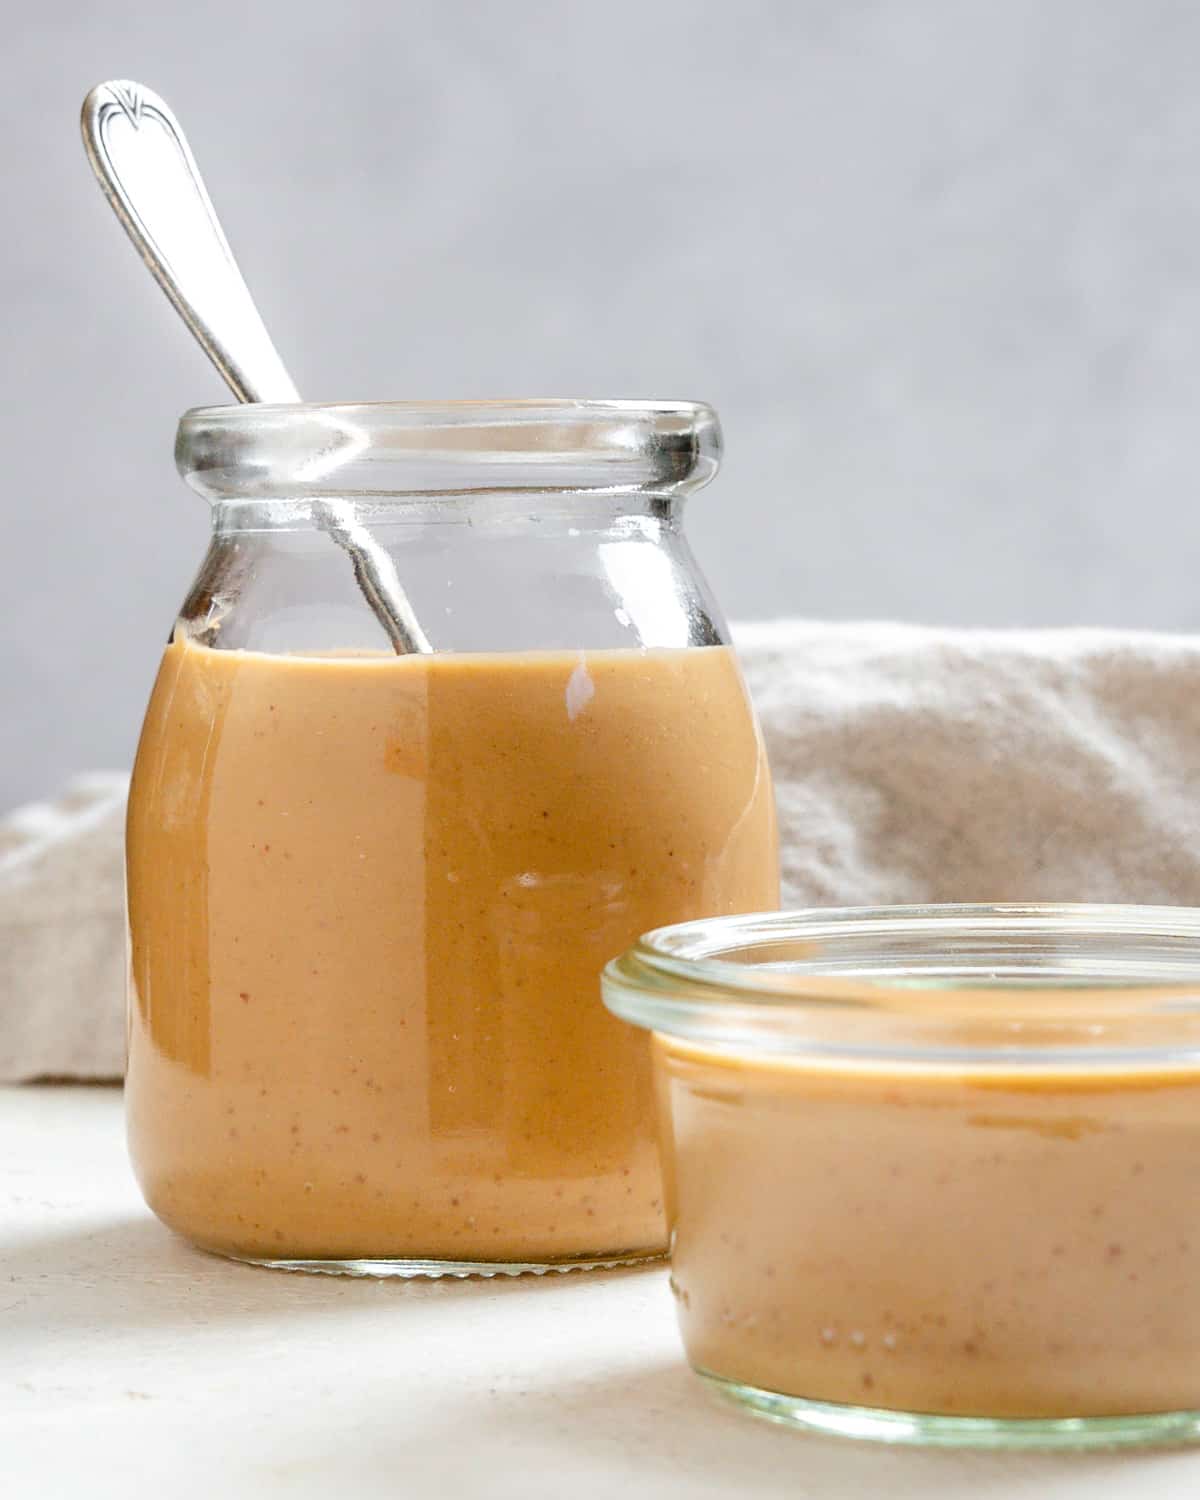 completed Spicy Peanut Dipping Sauce in two containers against a white background